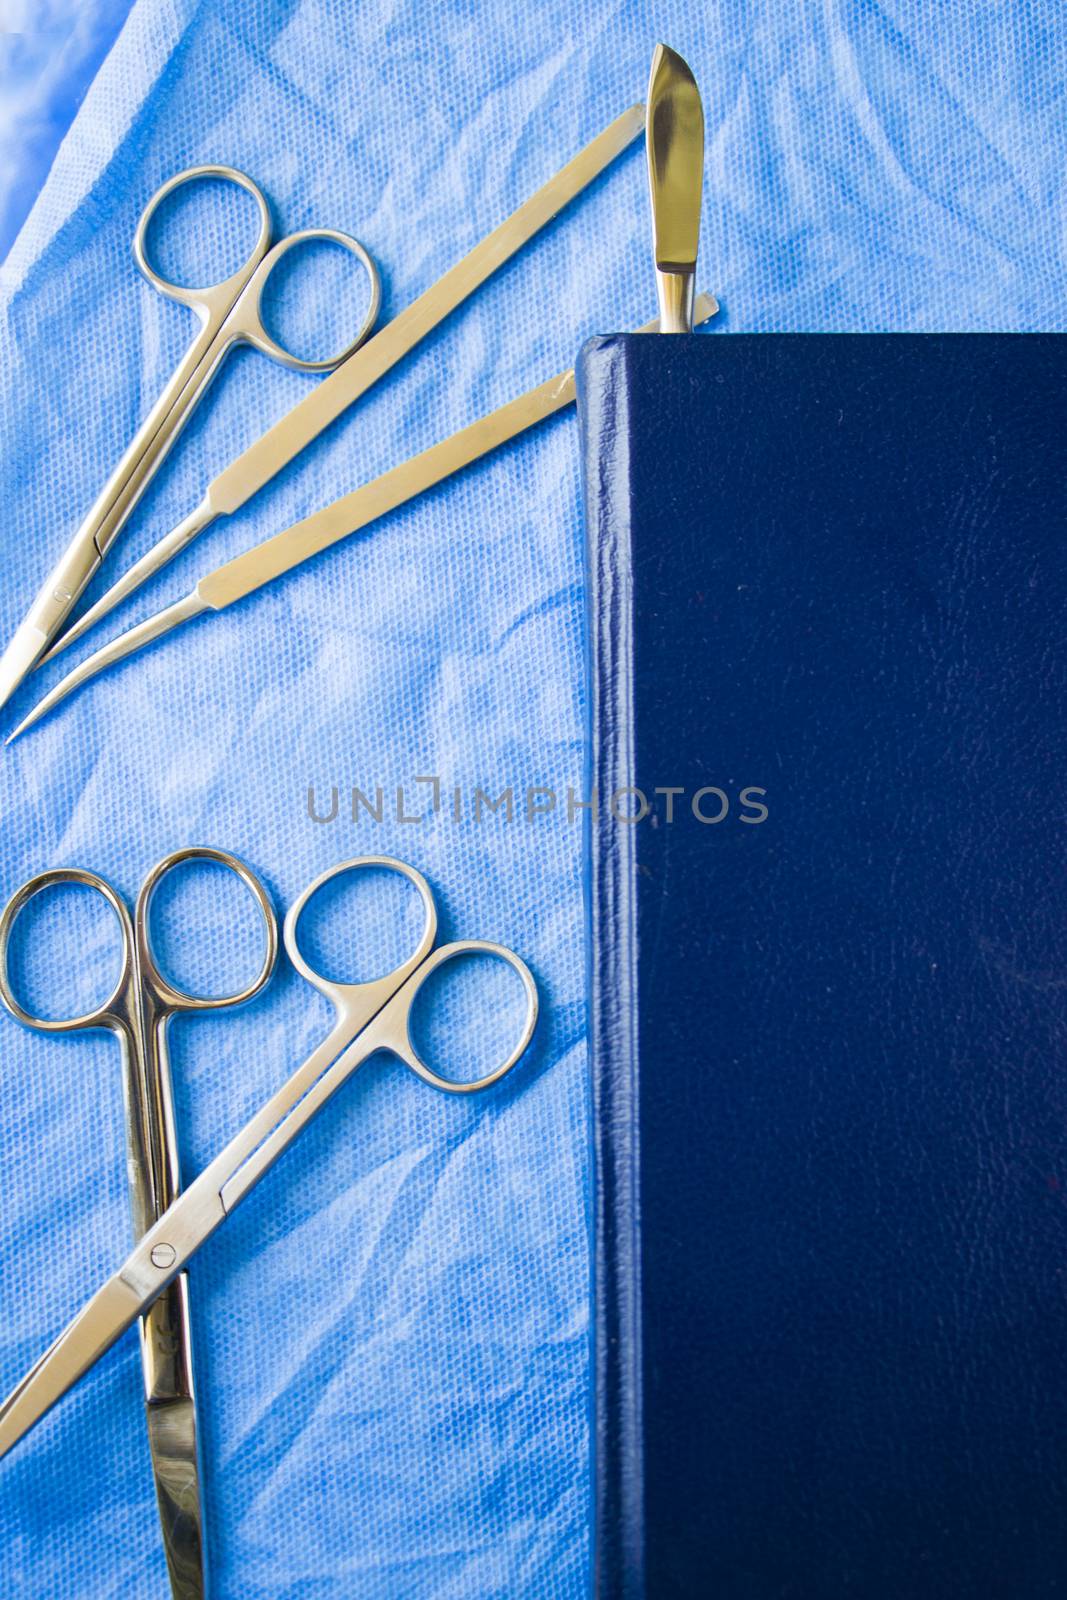 Dissection Kit - Stainless Steel Tools for Medical Students of Anatomy, Biology, Veterinary and learning book by Taidundua